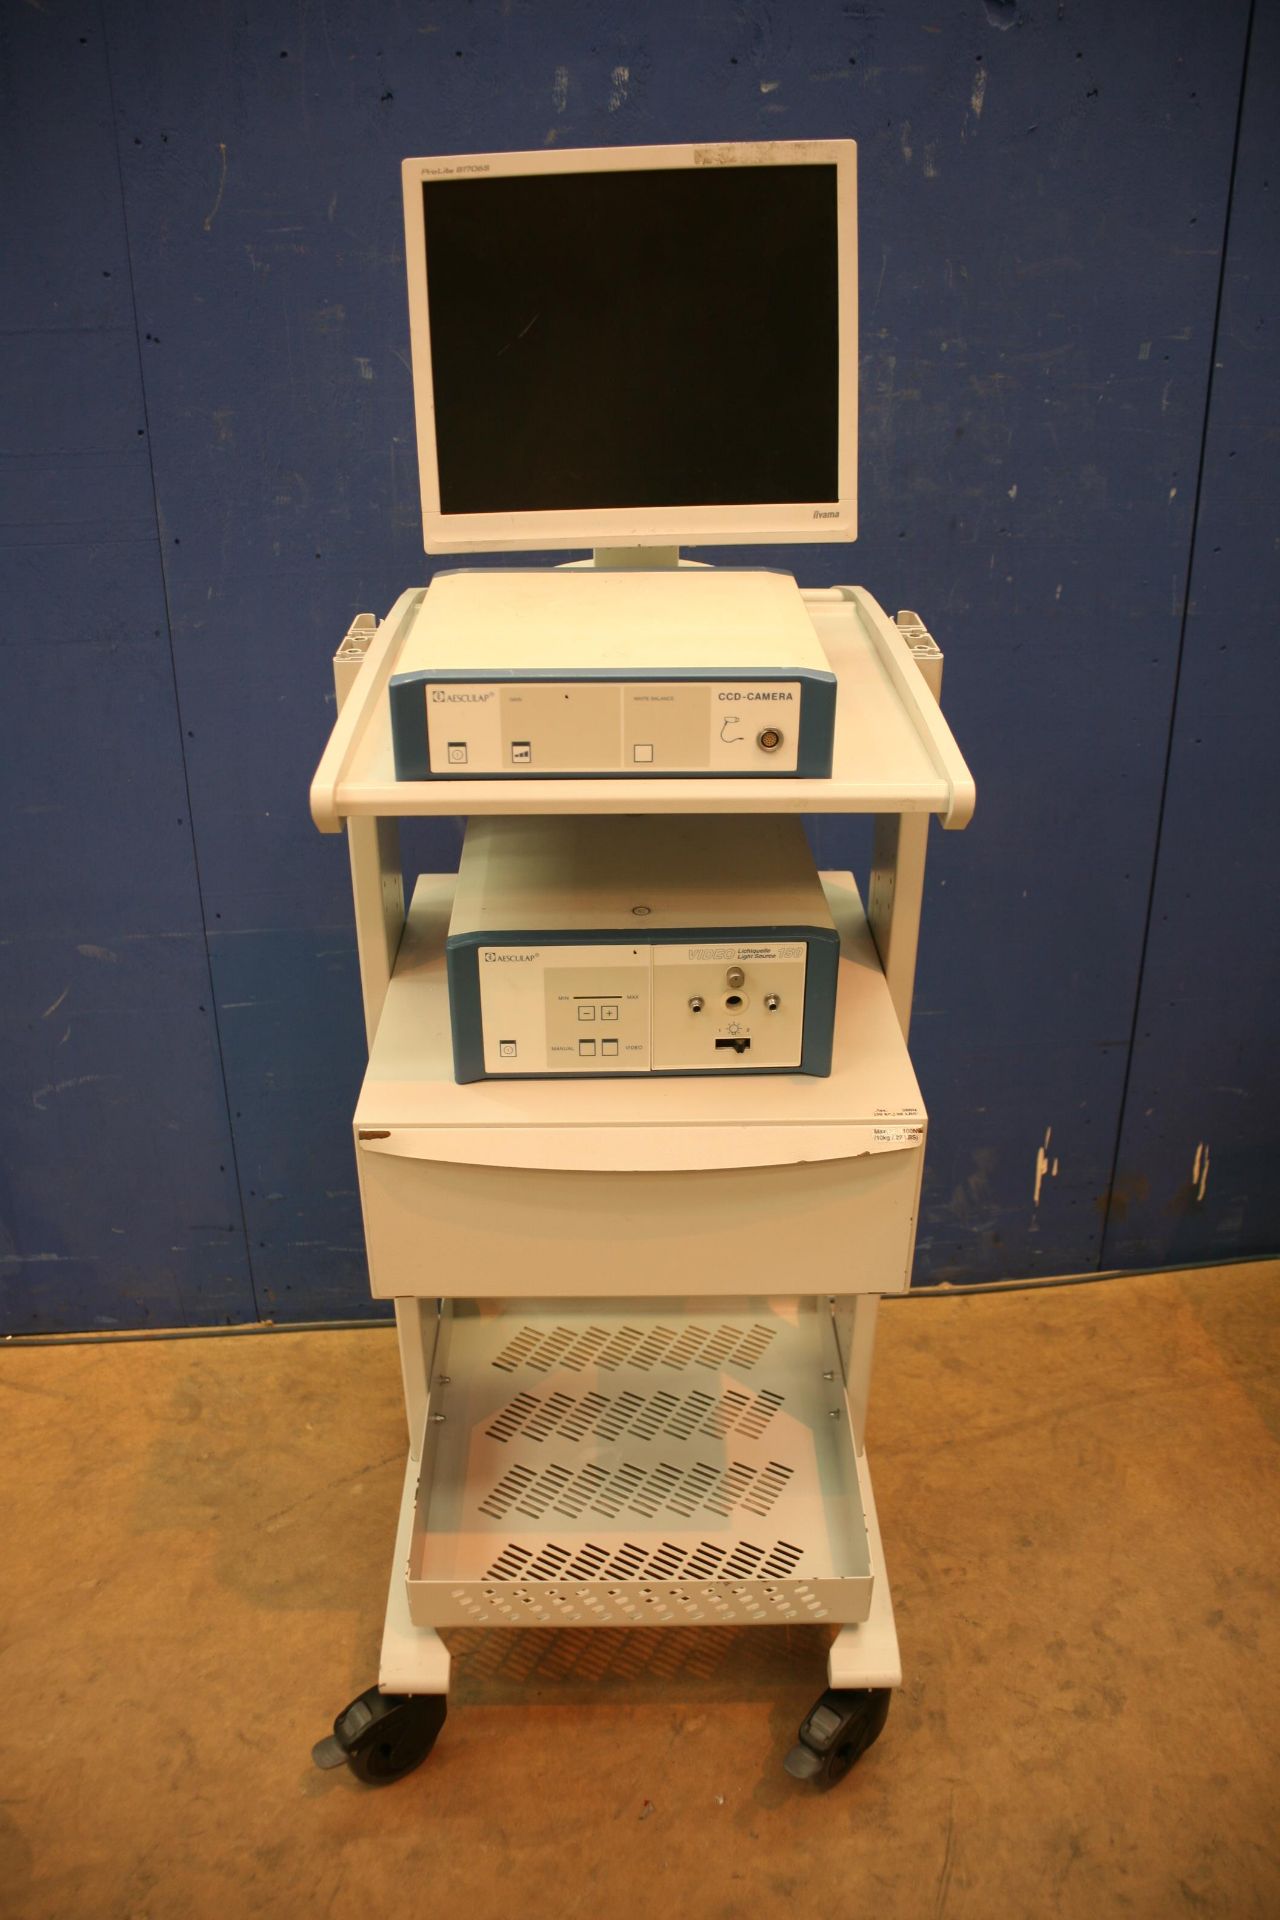 Stack Trolley With IIyama Prolite B1706S Monitor, Aesculap CCD-Camera Control Unit,